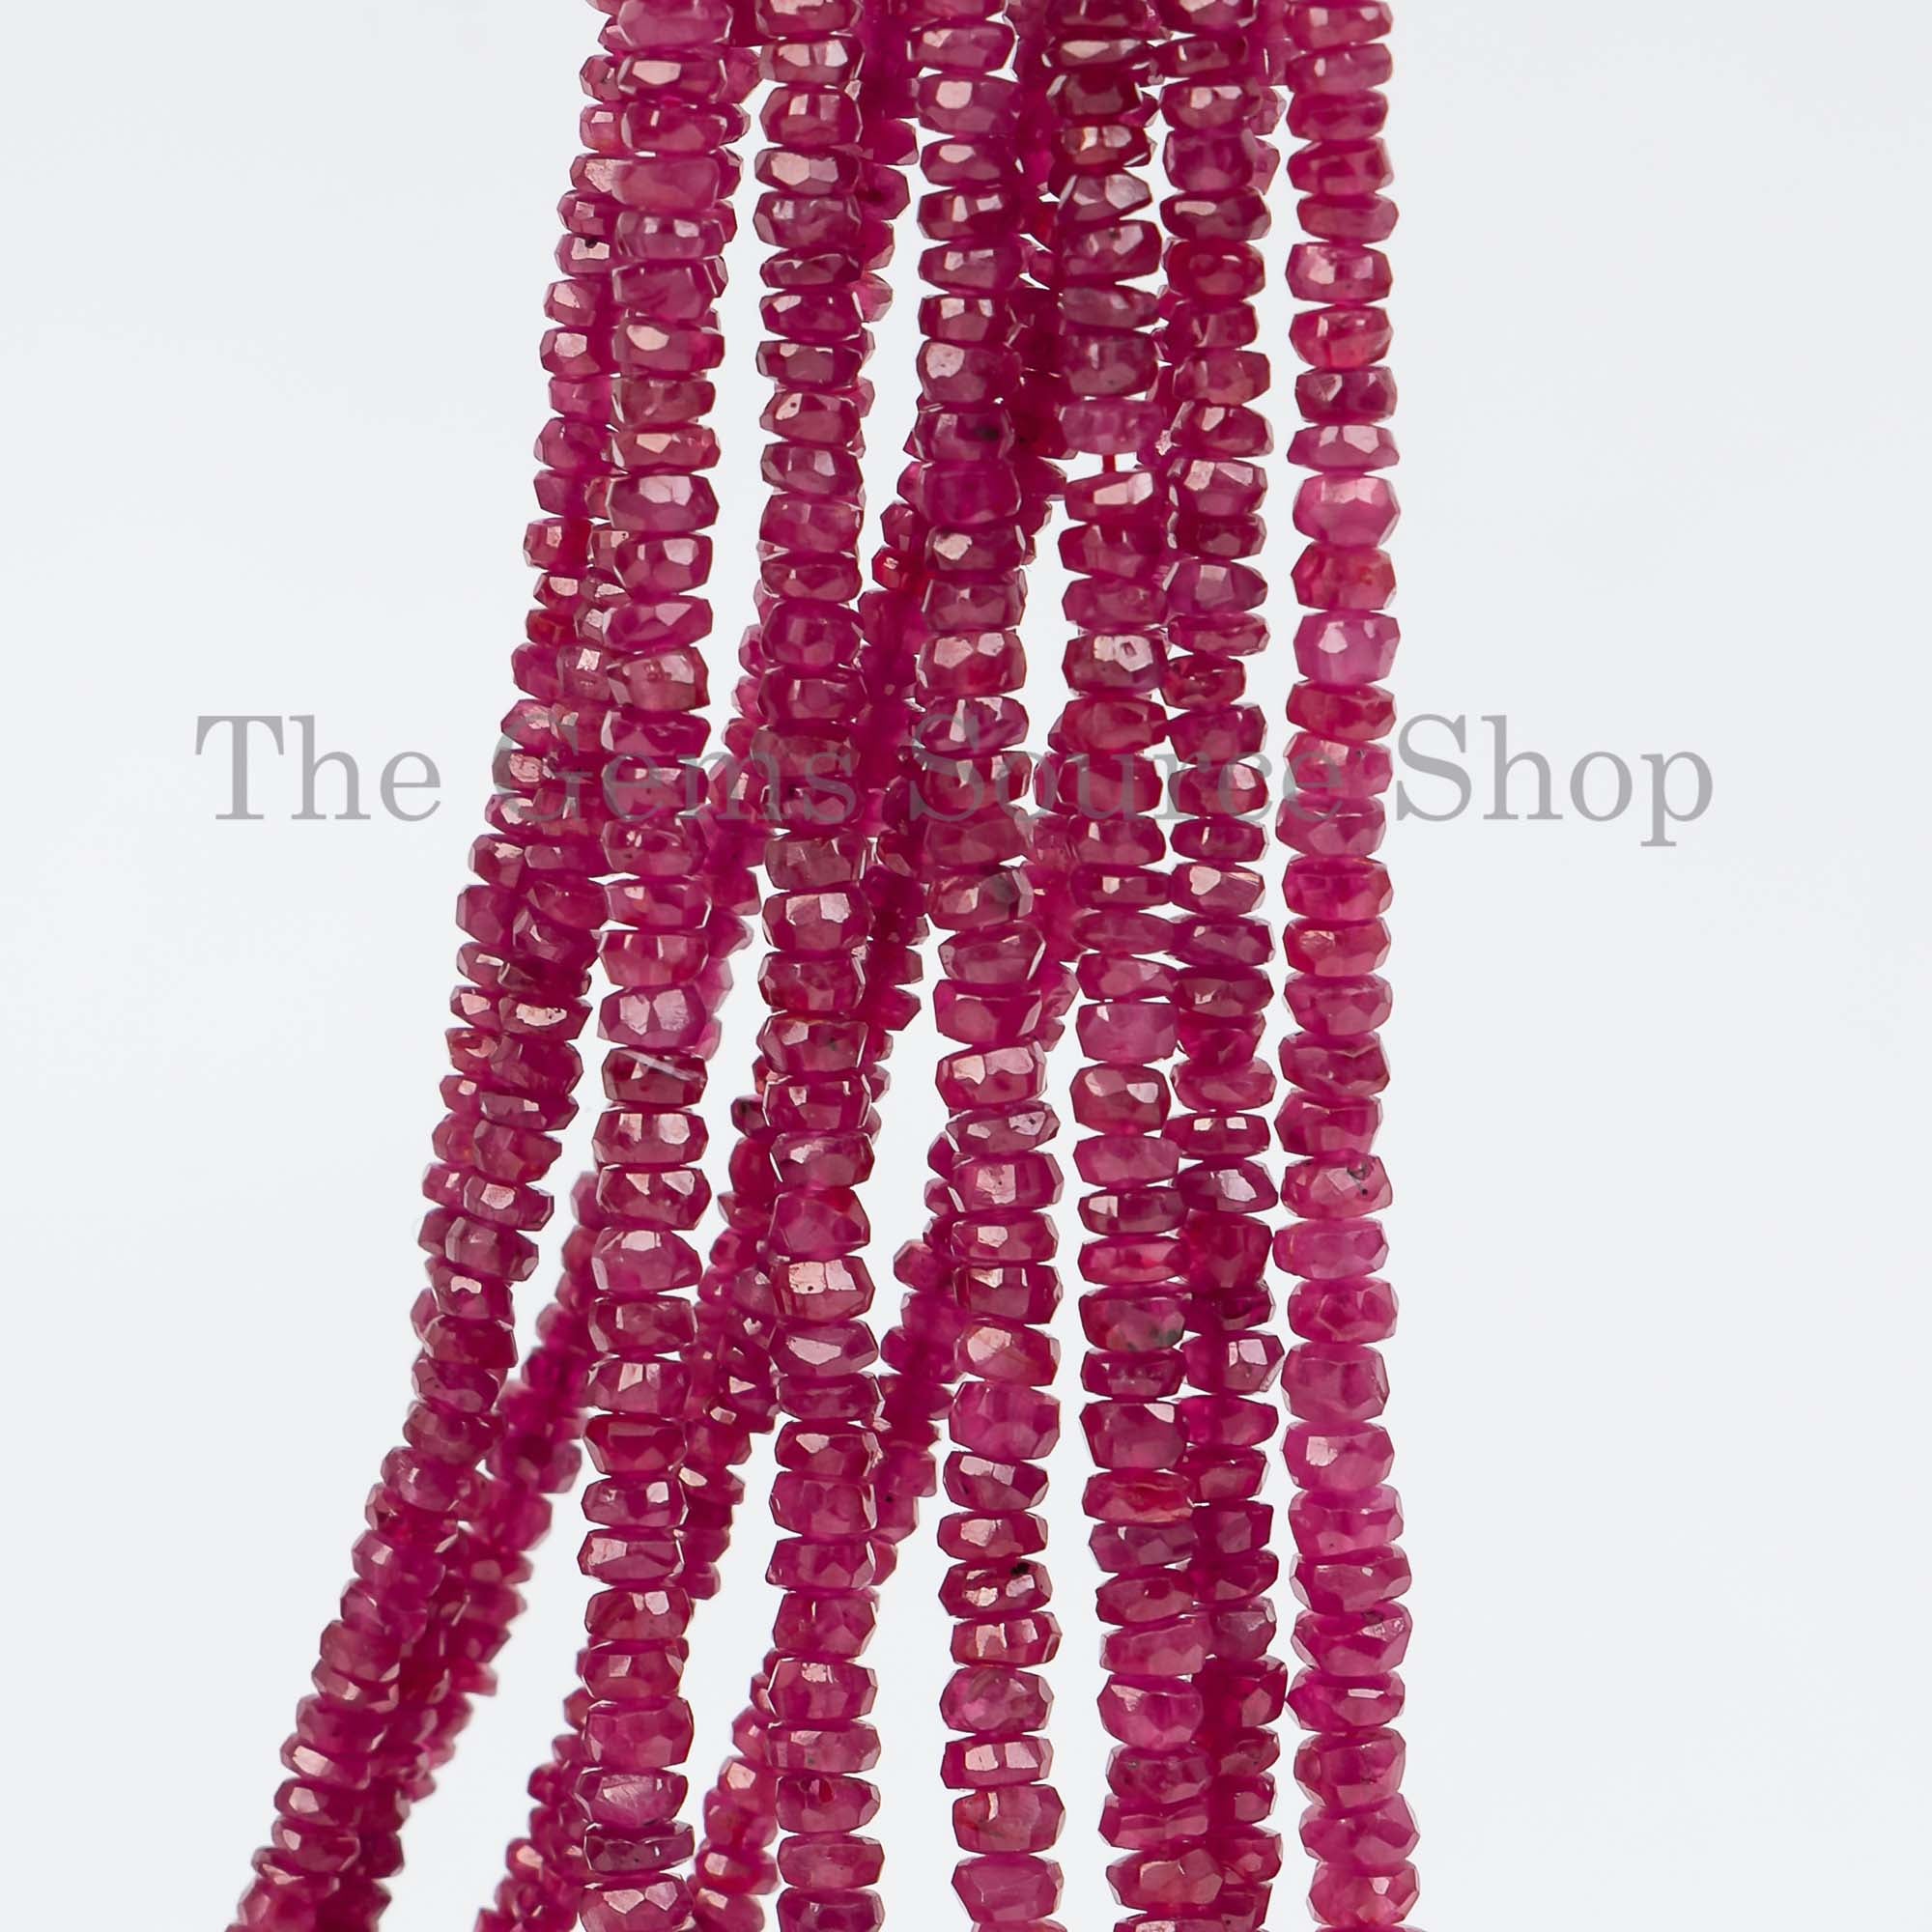 Natural Ruby Beads, Ruby Faceted Rondelle Beads, Ruby Faceted, Ruby Gemstone Beads